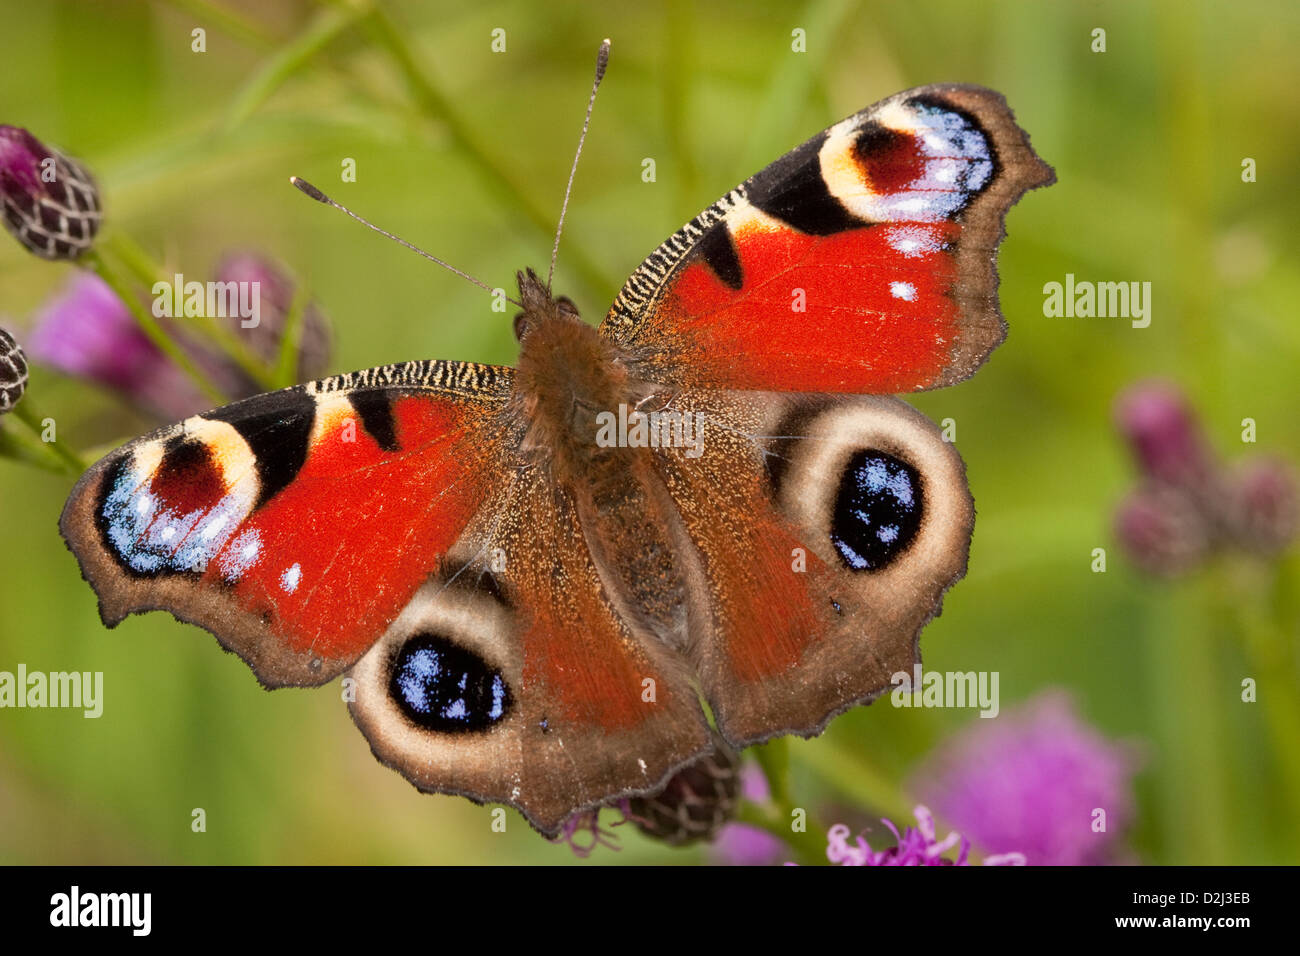 Peacock butterfly on Knapweed, England, UK Stock Photo